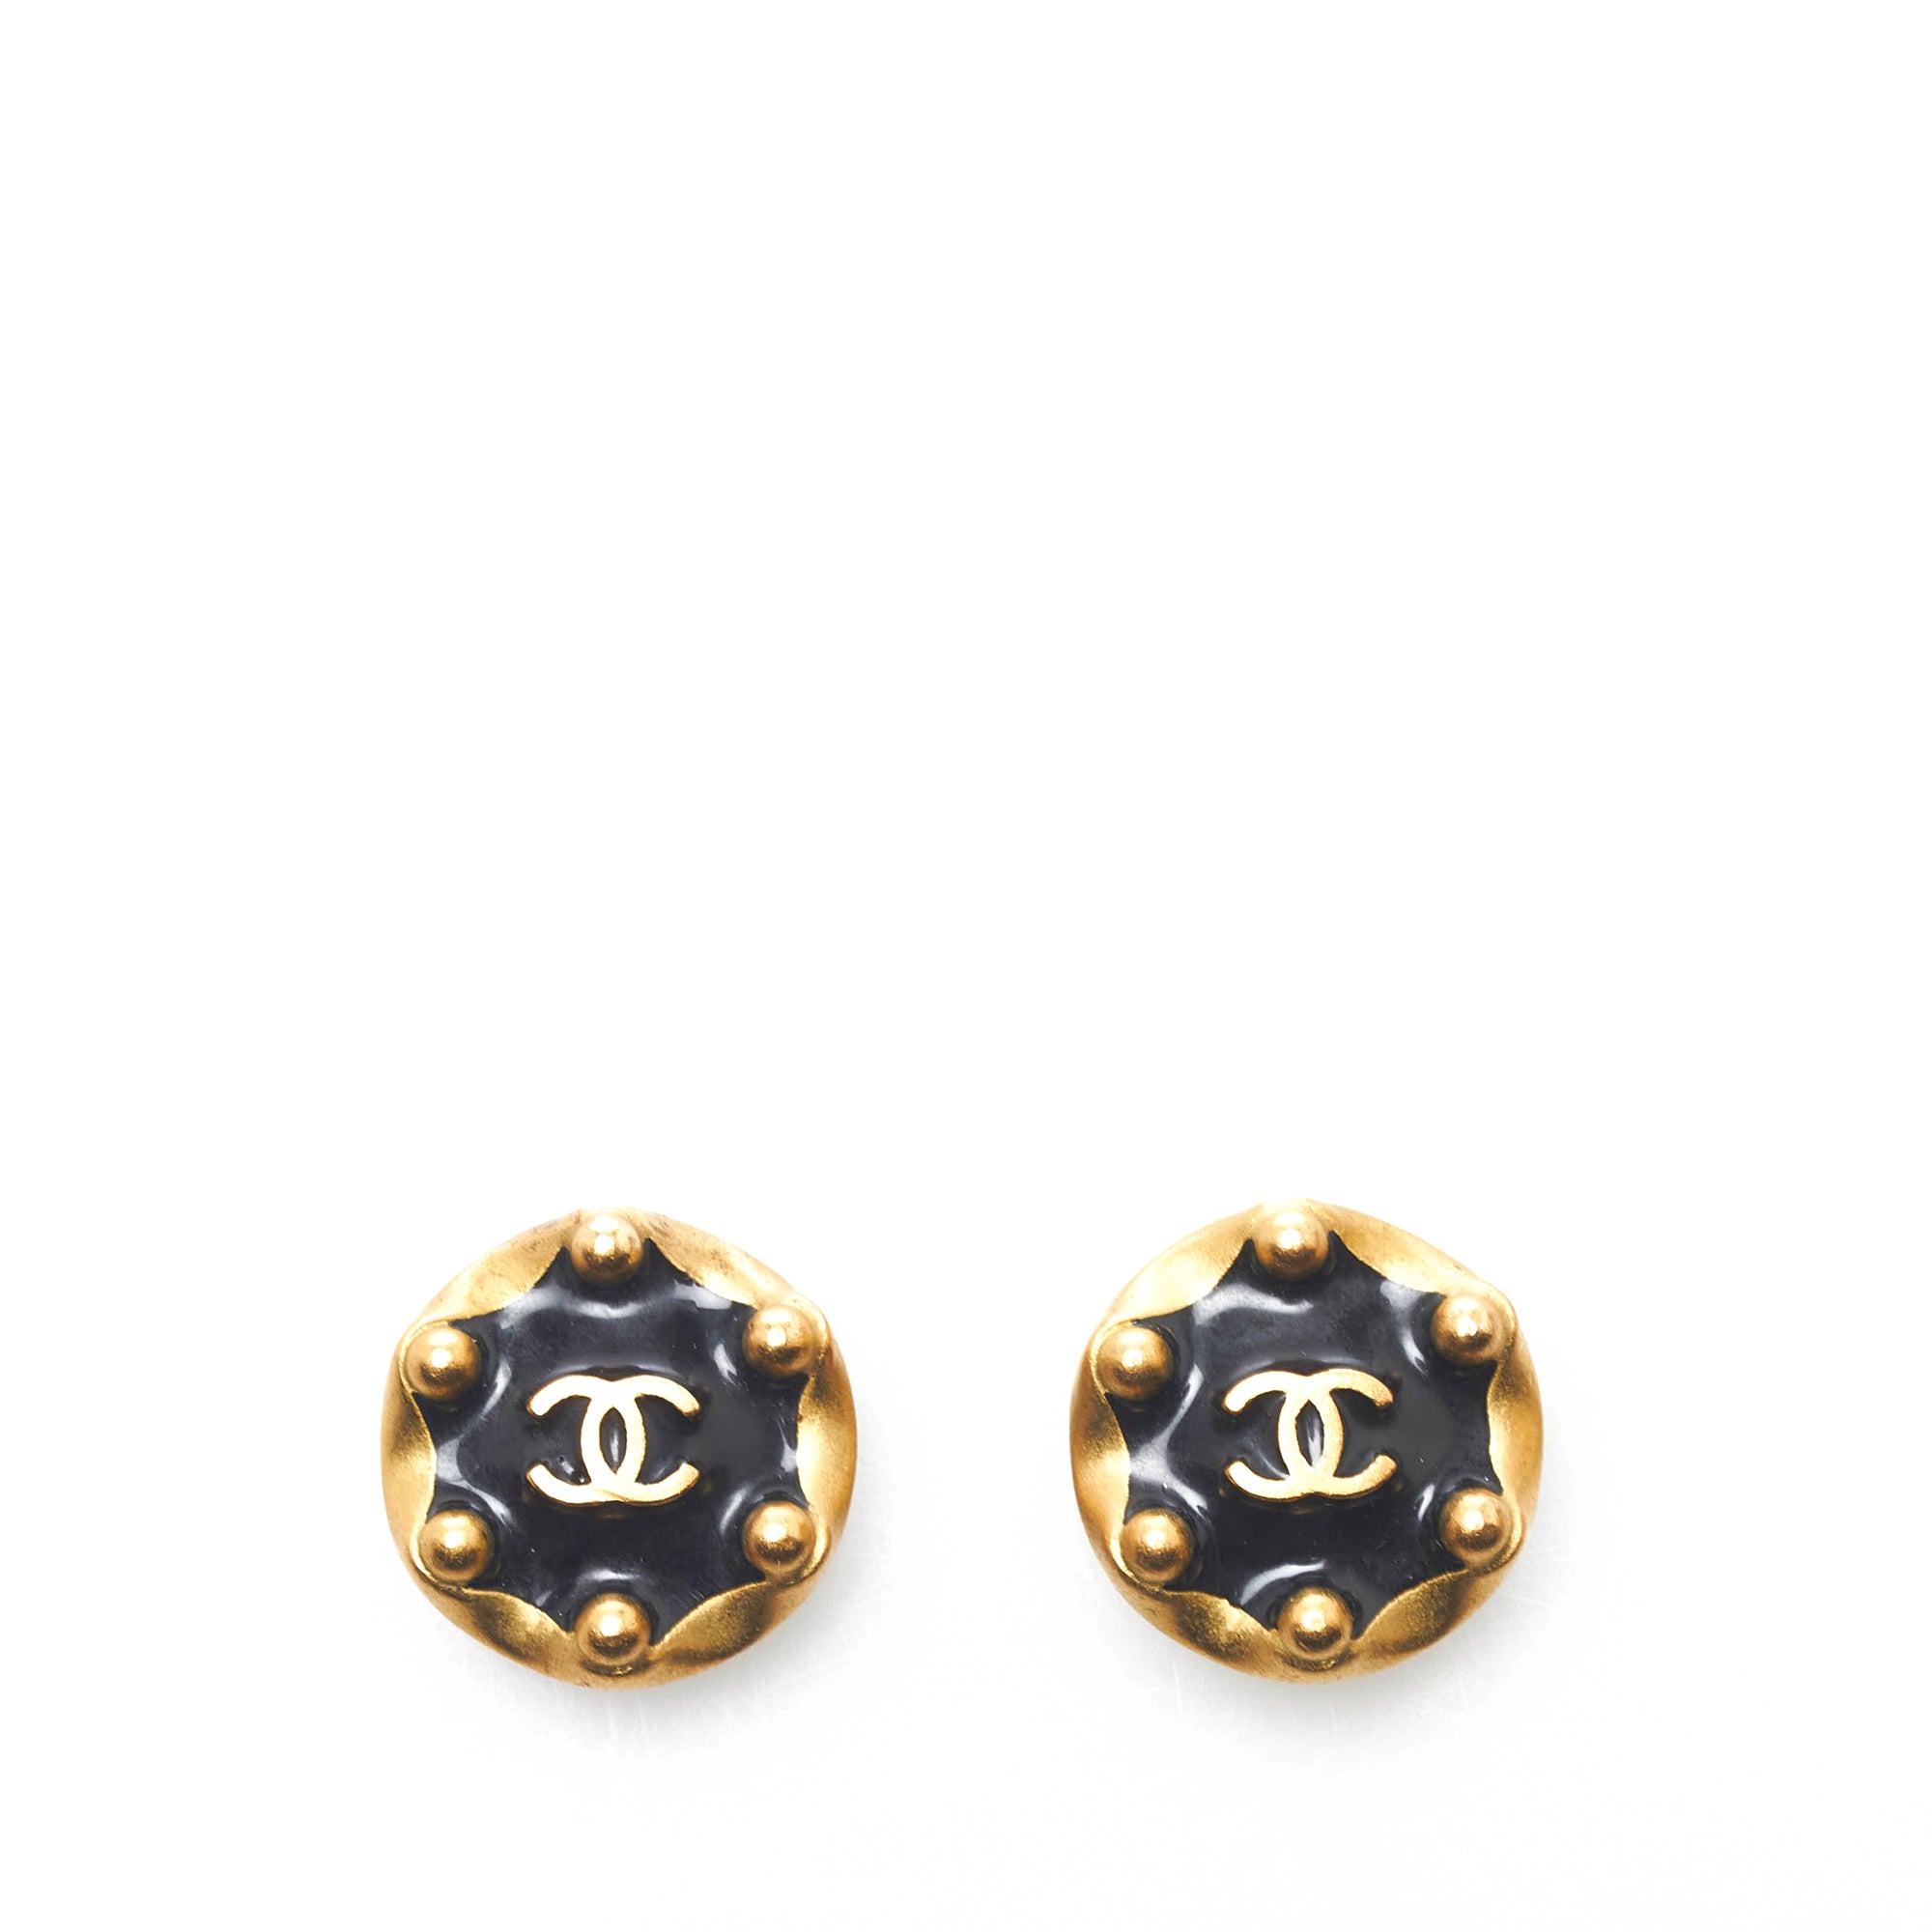 Chanel Pre-Owned Pre-Owned Jewelry - RvceShops Revival - on Earrings